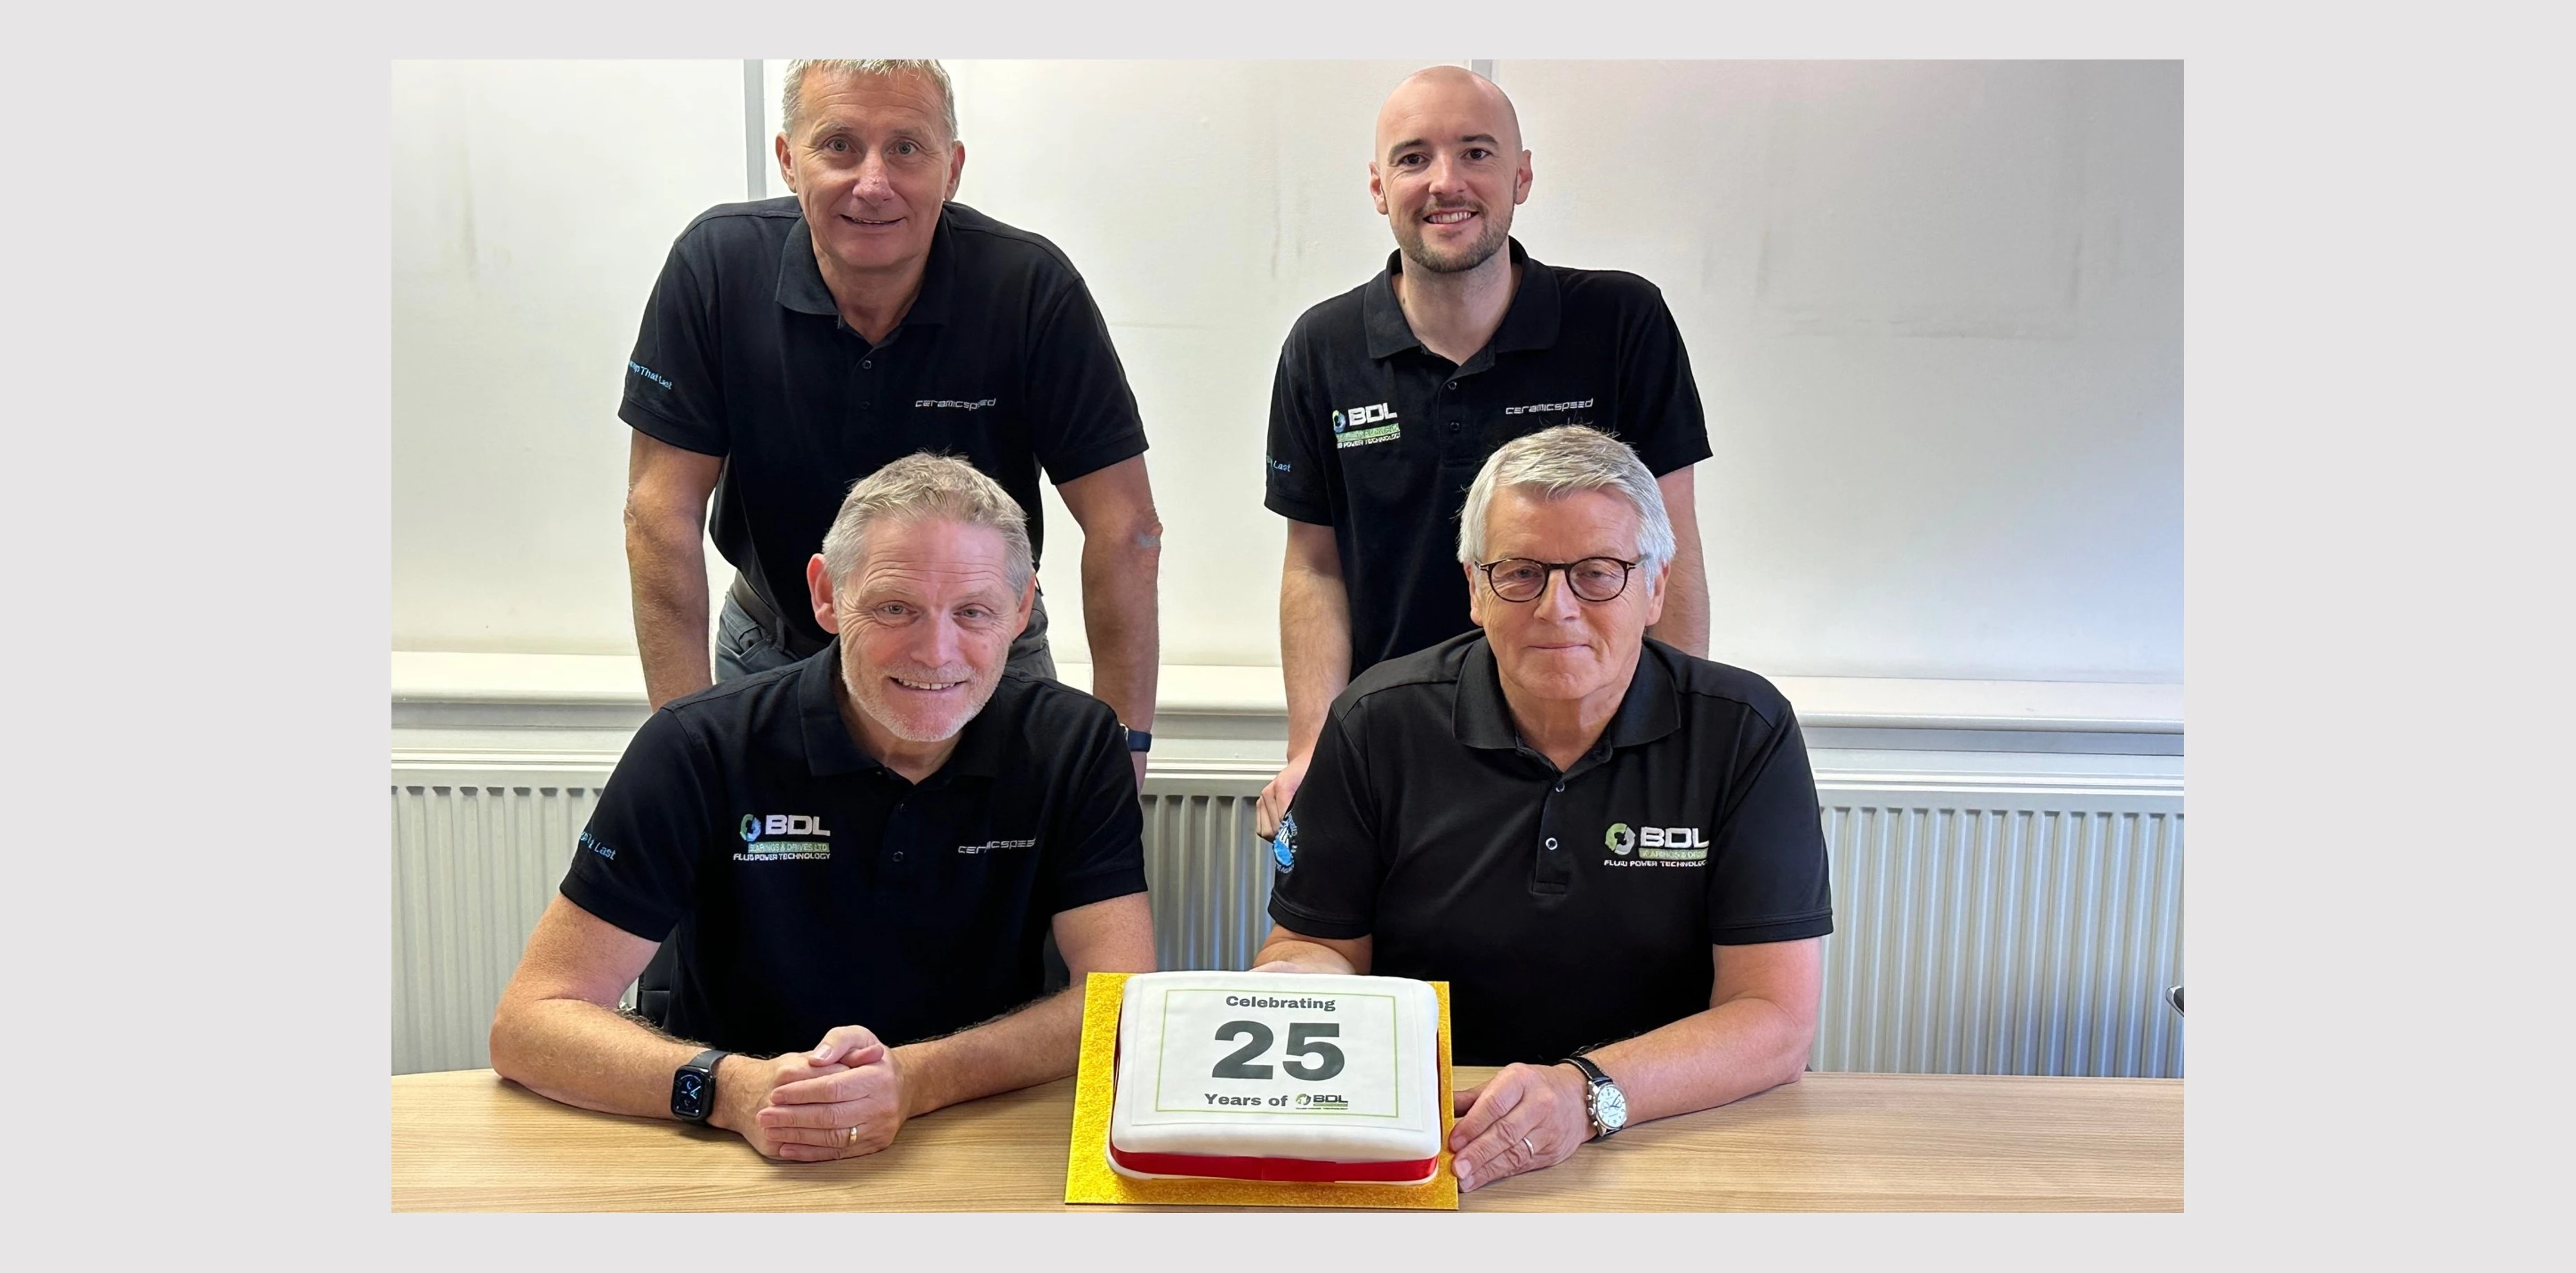 Bearings & Drives Celebrate 25 Years. Top left to right Steve Bacon, Ben Booth. Bottom left to right John Middleton, William Simpson 